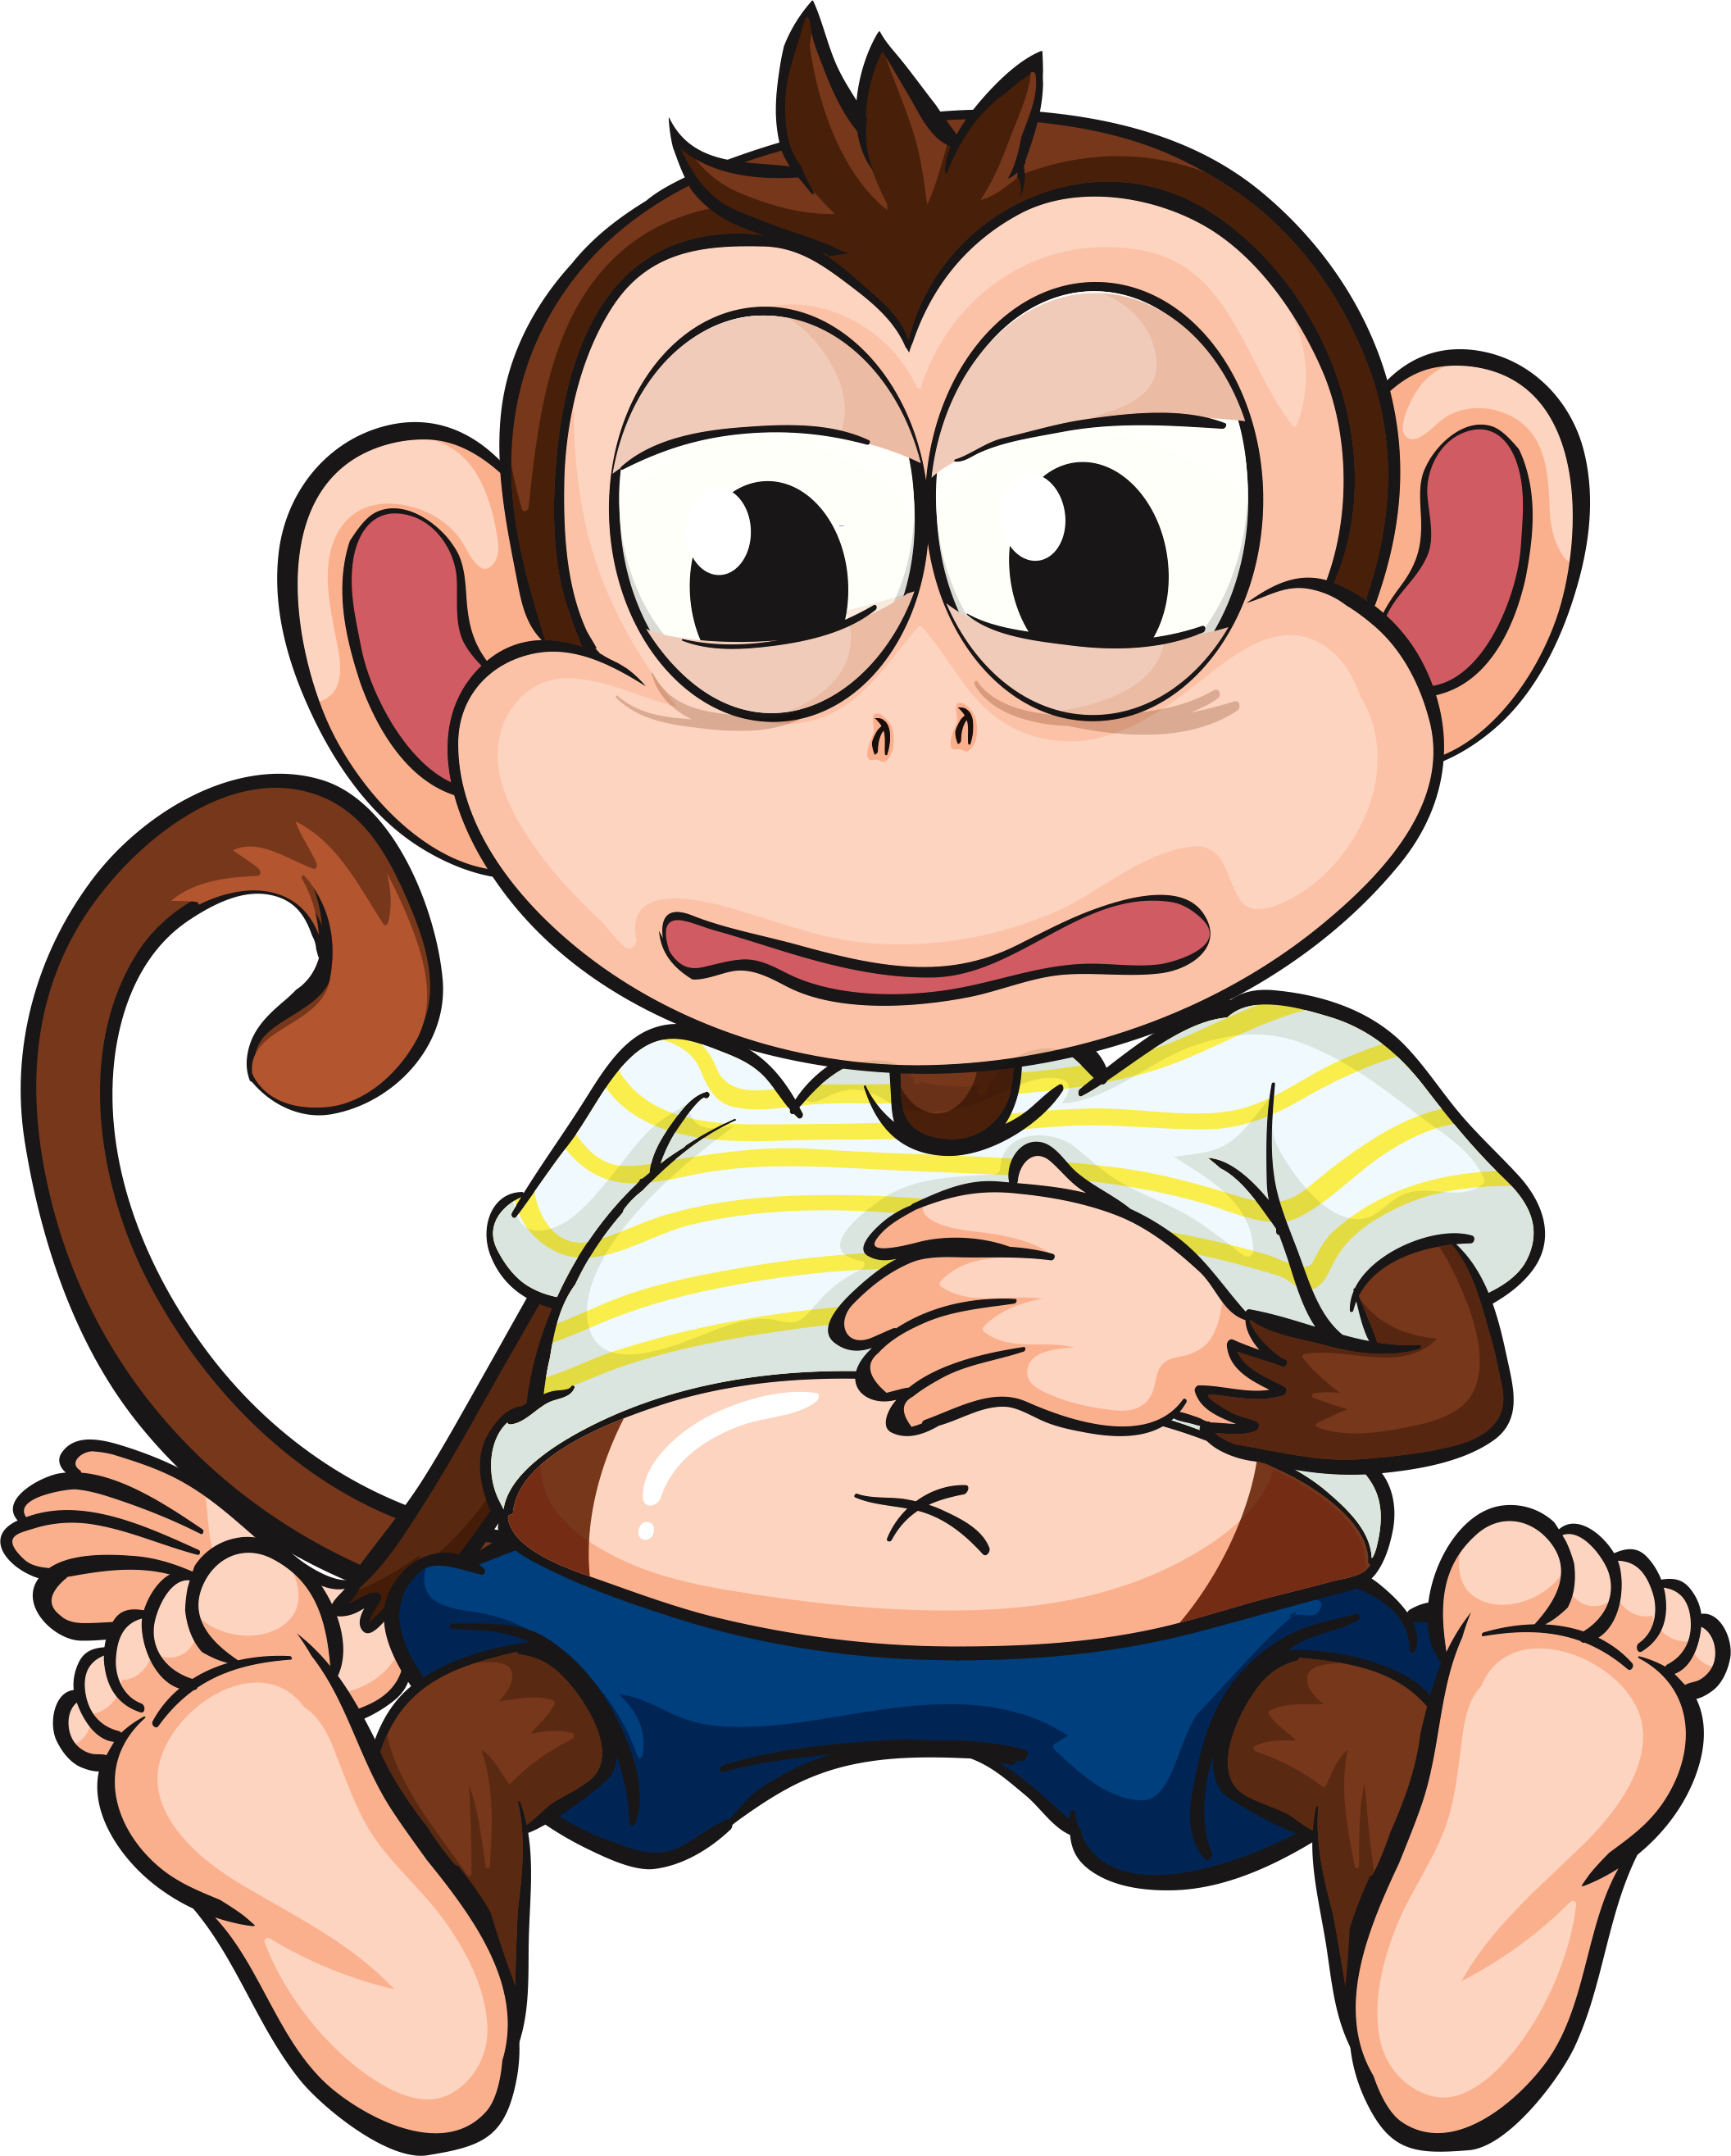 Download Monkey Business, Monkeys, Clip Art, Rompers, Illustrations, - Sick Monkey  Cartoon PNG Image with No Background 